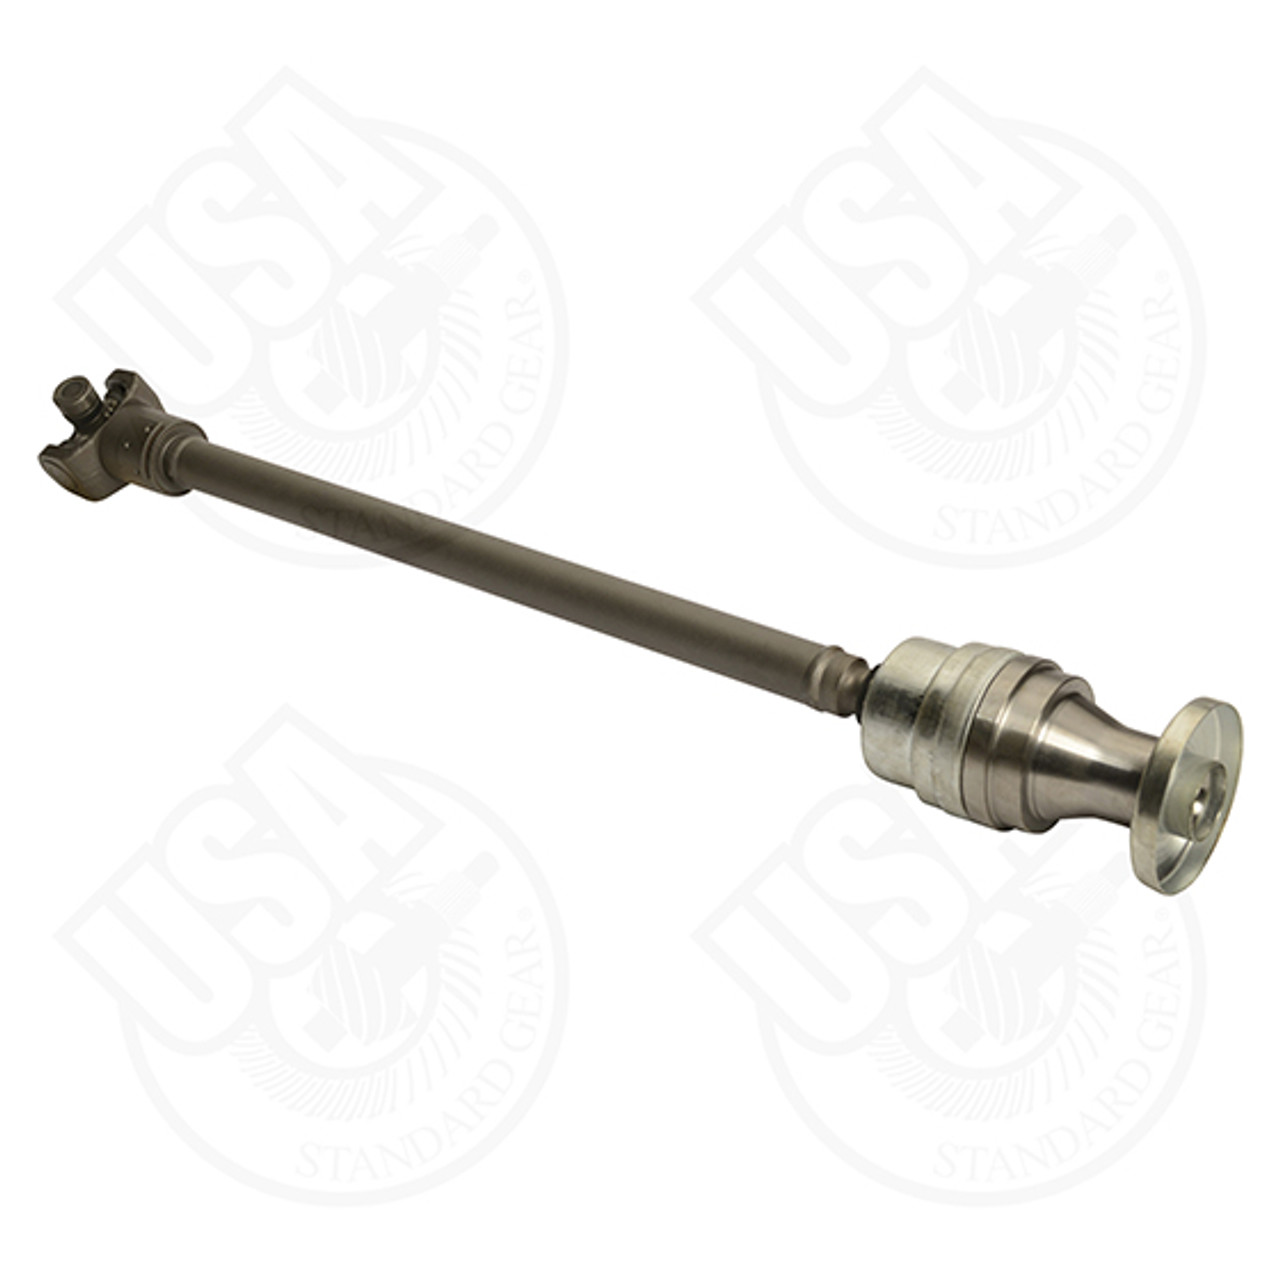 NEW USA Standard Front Driveshaft for GM & Oldsmobile Midsize Truck & SUV, 19" Weld to Weld